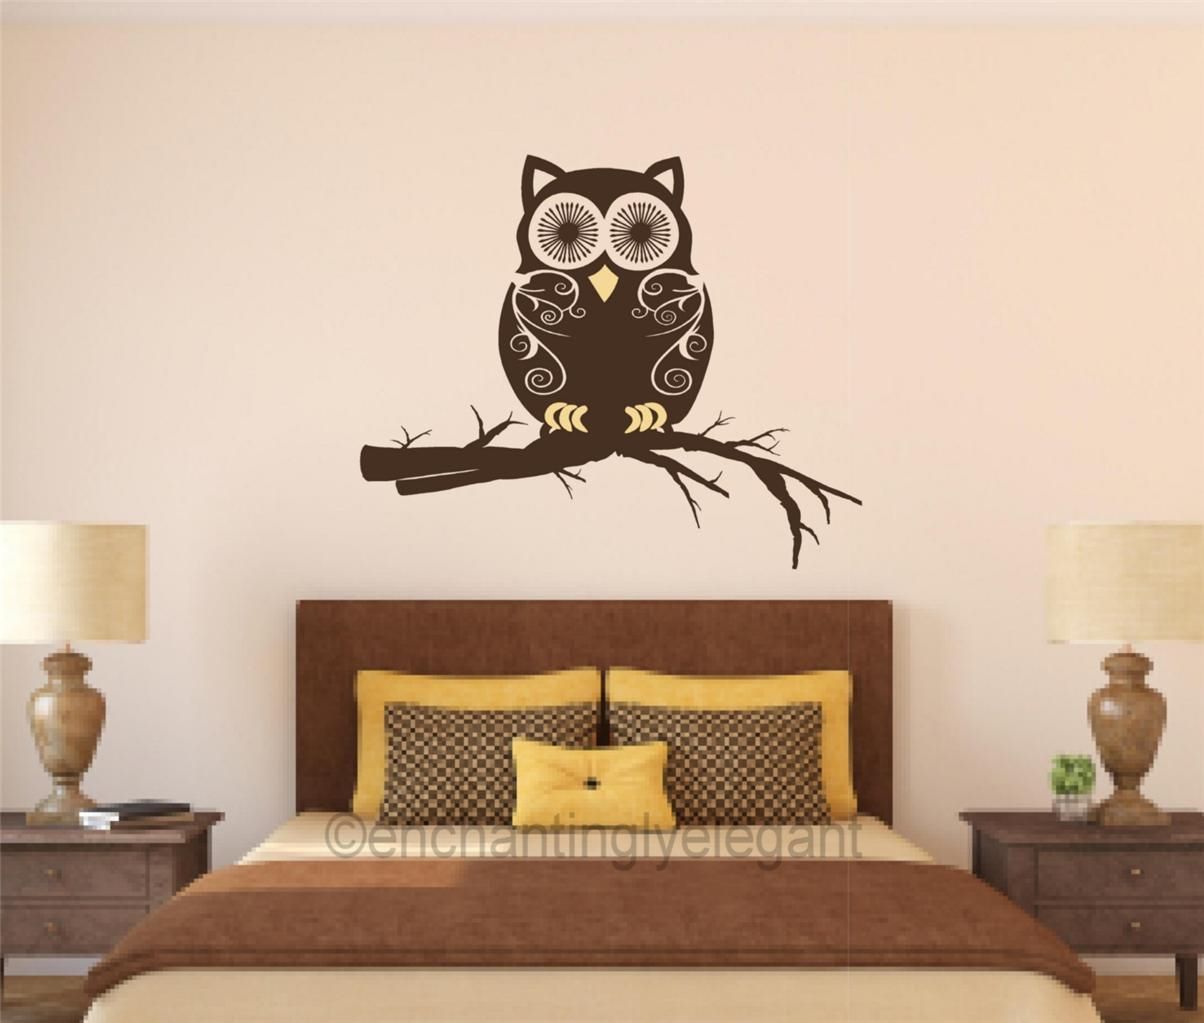 Lovely owl idea for the wall ) Totally putting this to my room Owl